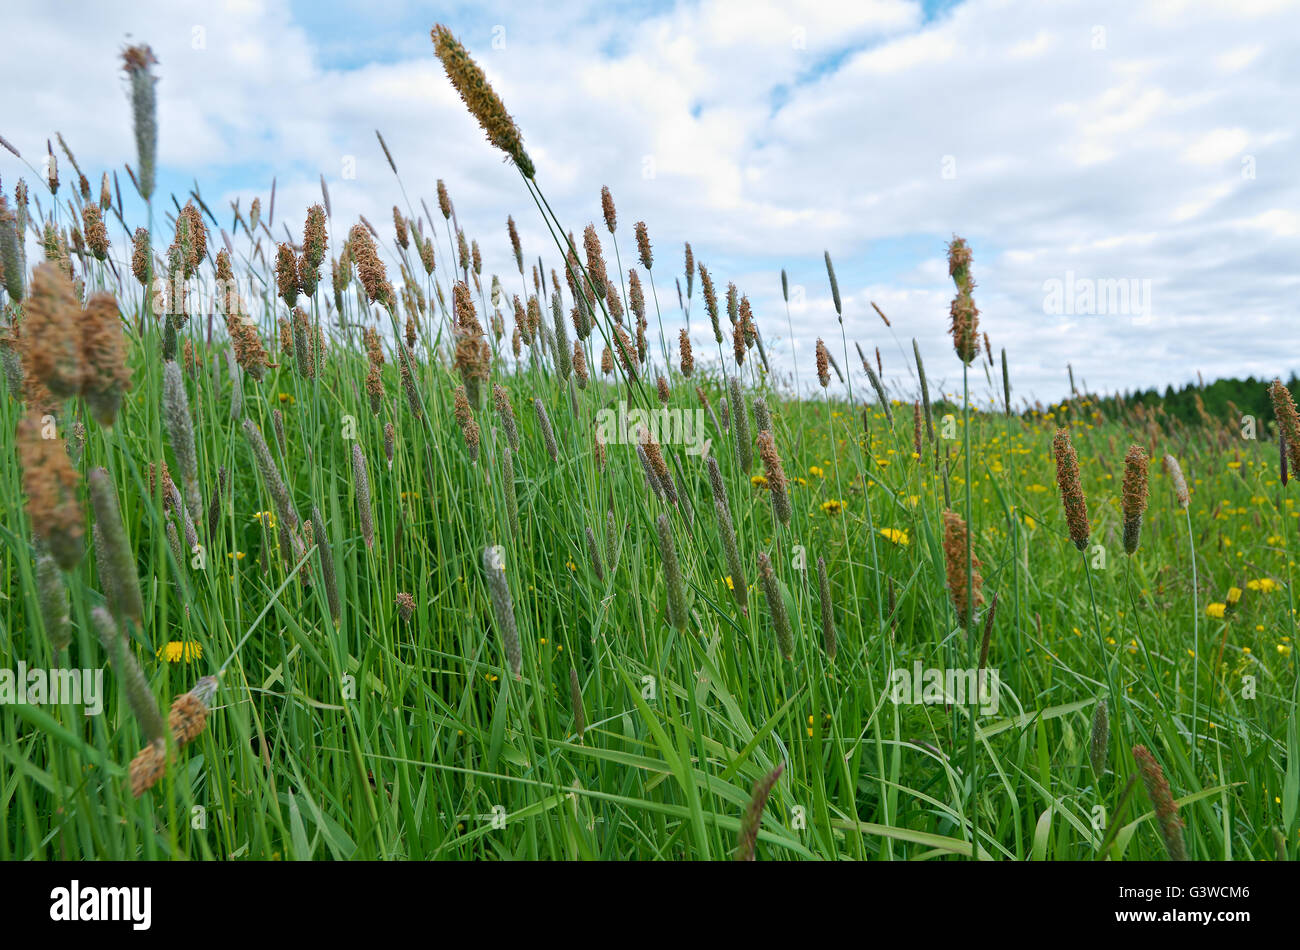 Russian meadow with  Timothy-grass.Arkhangelsk region. Russian North. Stock Photo